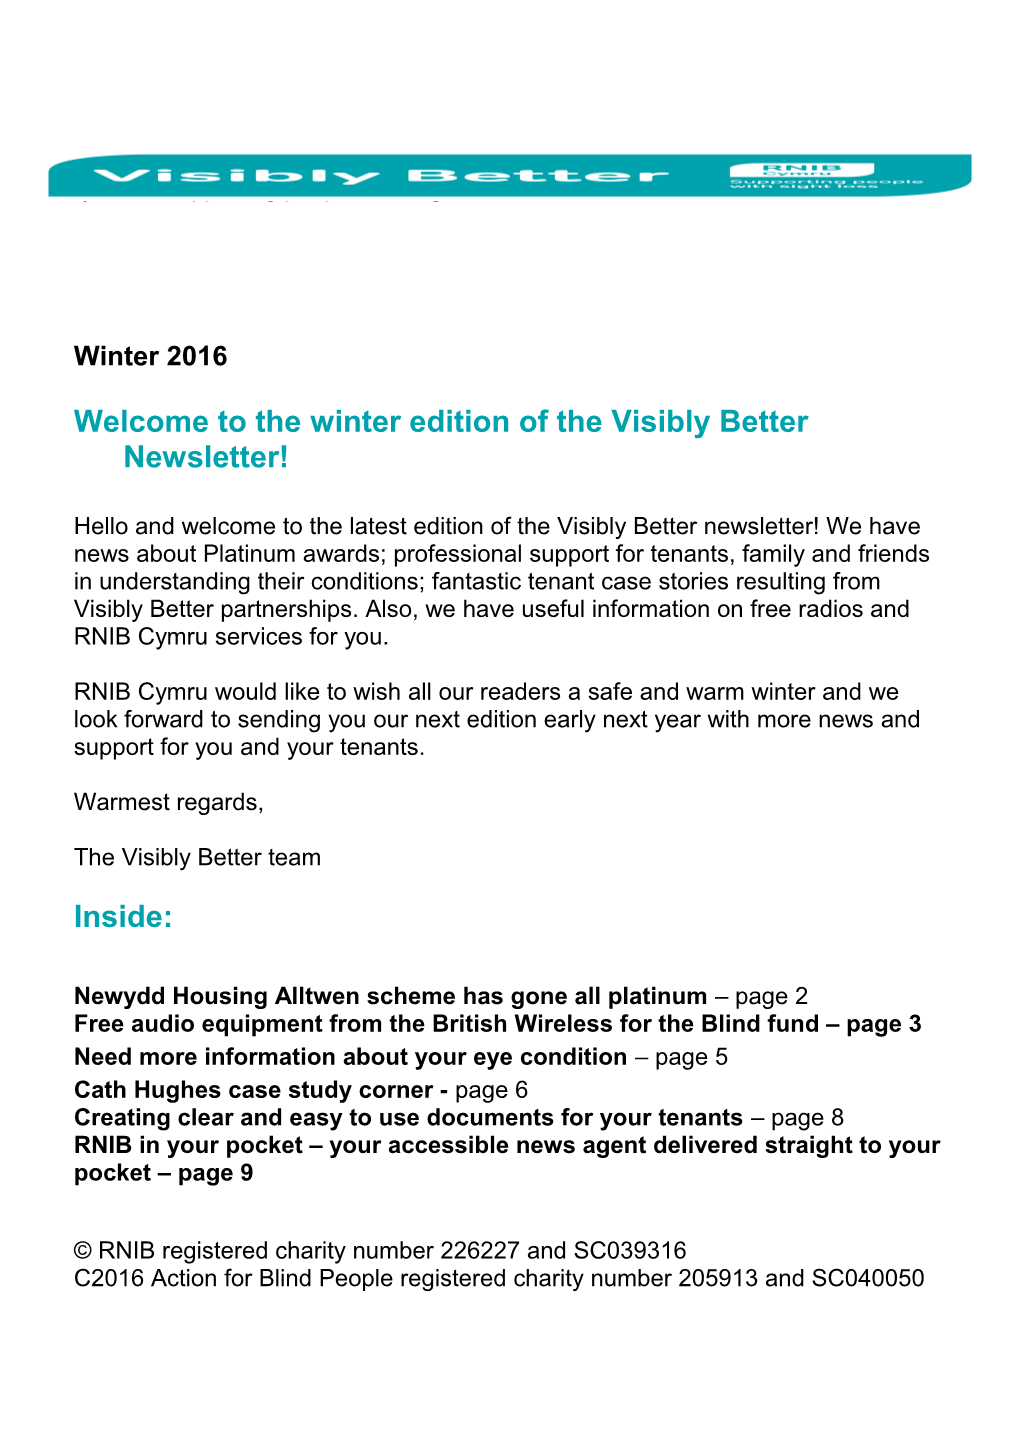 Welcome to the Winter Edition of the Visibly Better Newsletter!